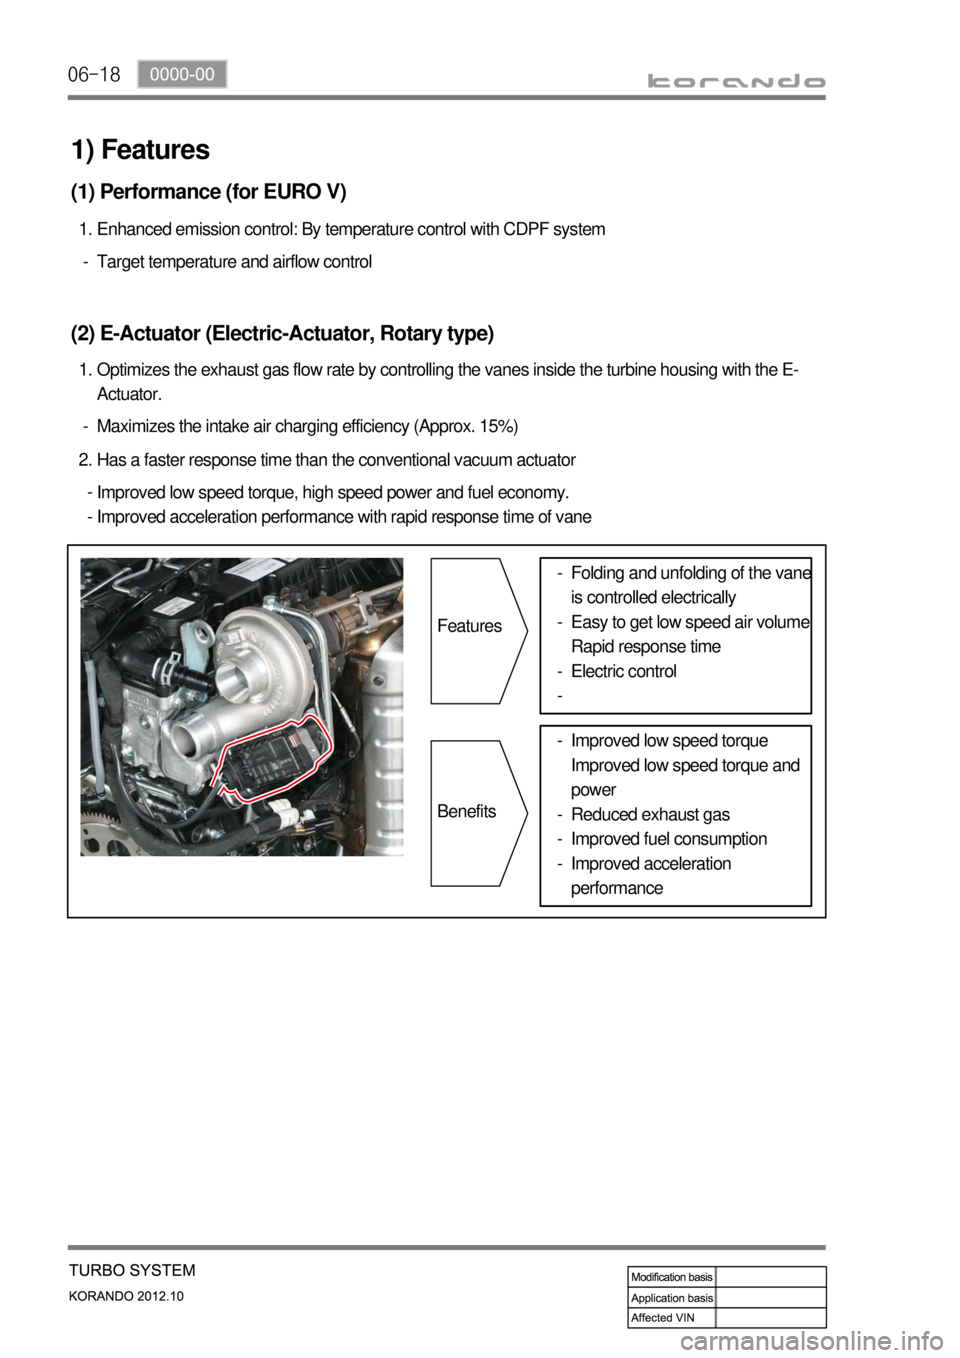 SSANGYONG KORANDO 2012  Service Manual 06-18
Maximizes the intake air charging efficiency (Approx. 15%) -Optimizes the exhaust gas flow rate by controlling the vanes inside the turbine housing with the E-
Actuator. 1.
(2) E-Actuator (Elect